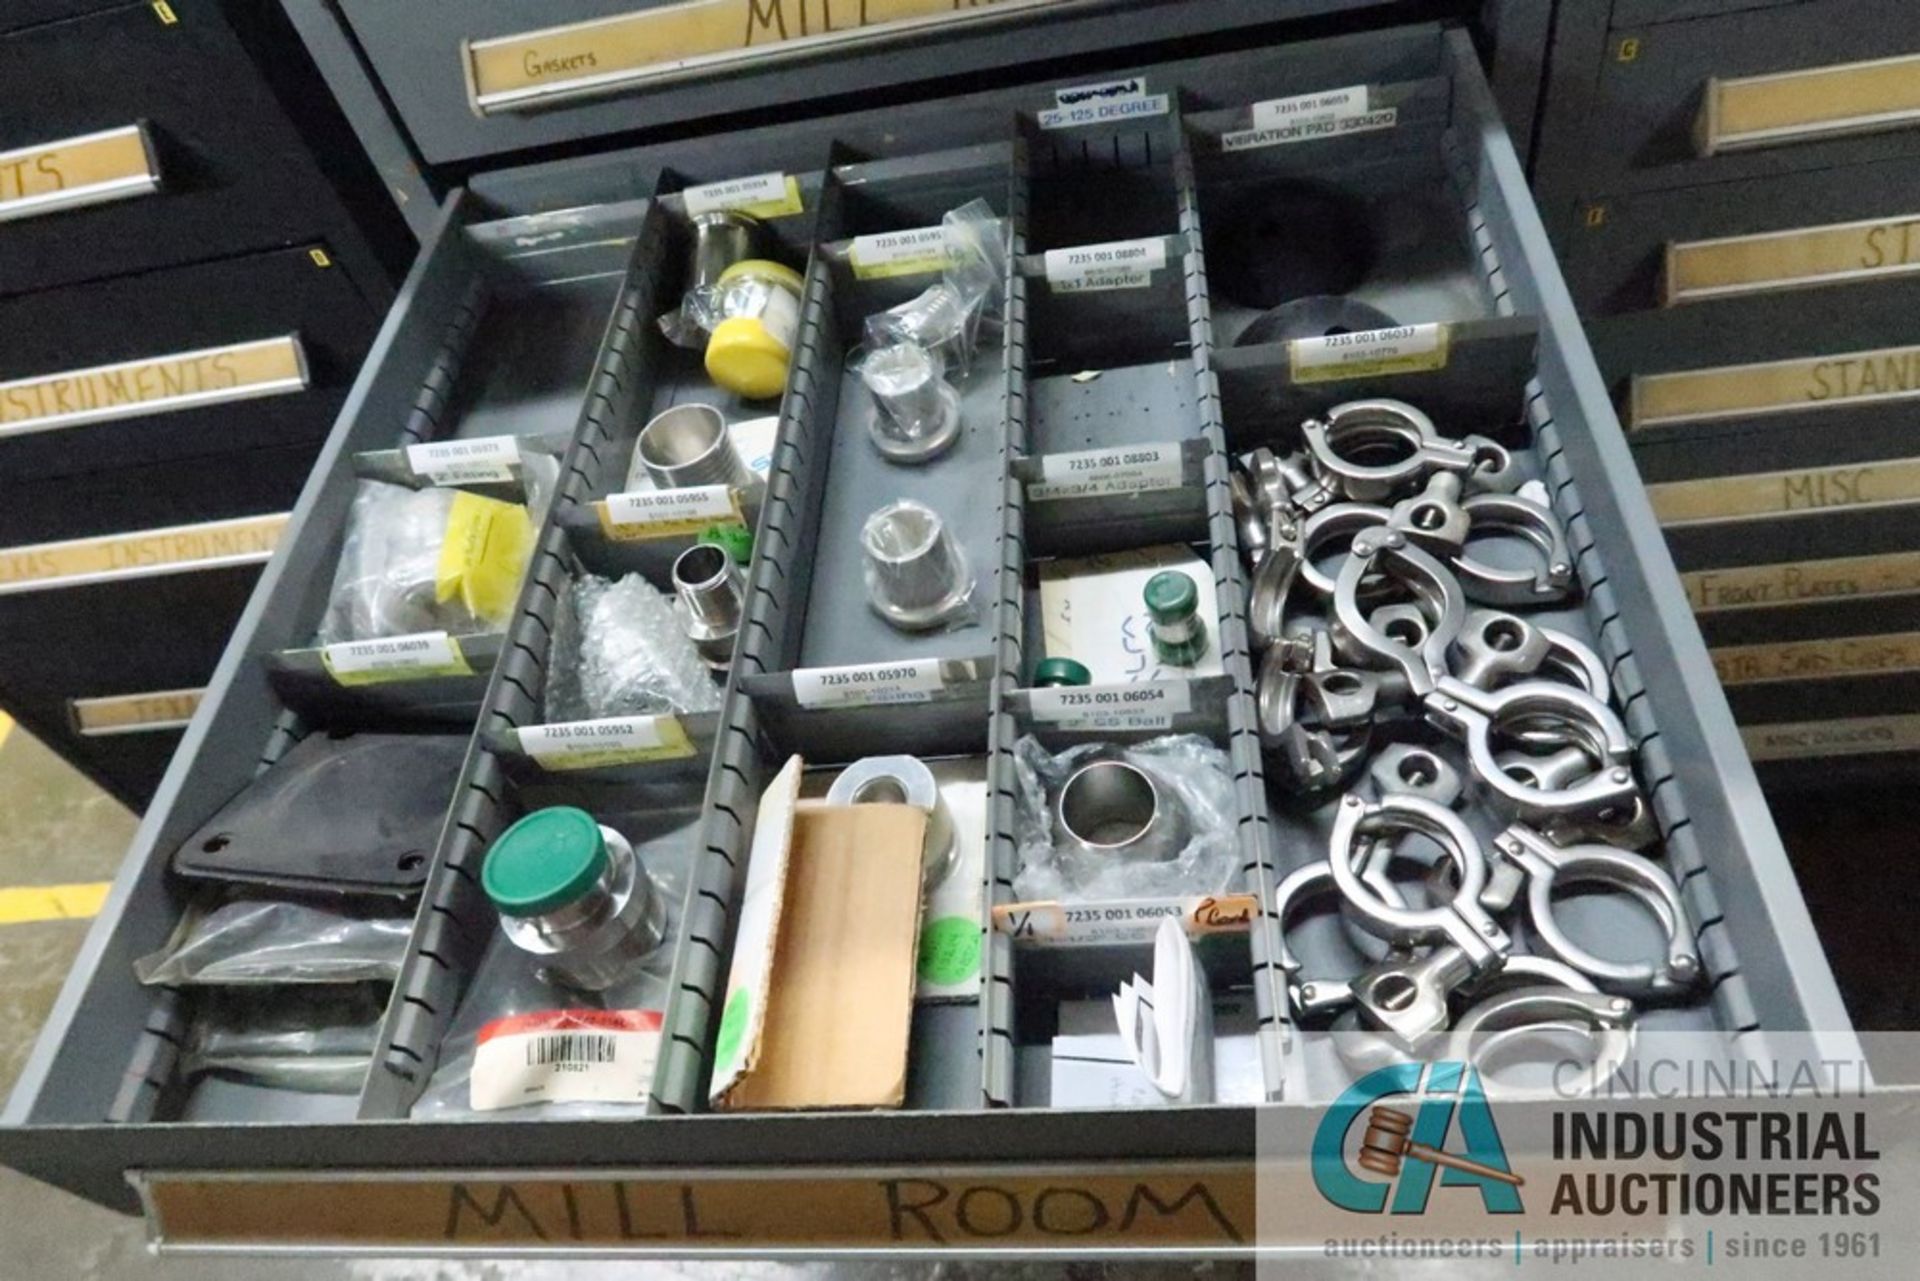 12-DRAWER VIDMAR CABINET WITH CONTENTS INCLUDING MISCELLANEOUS MILL ROOM PARTS (CABINET OB) - Image 5 of 8